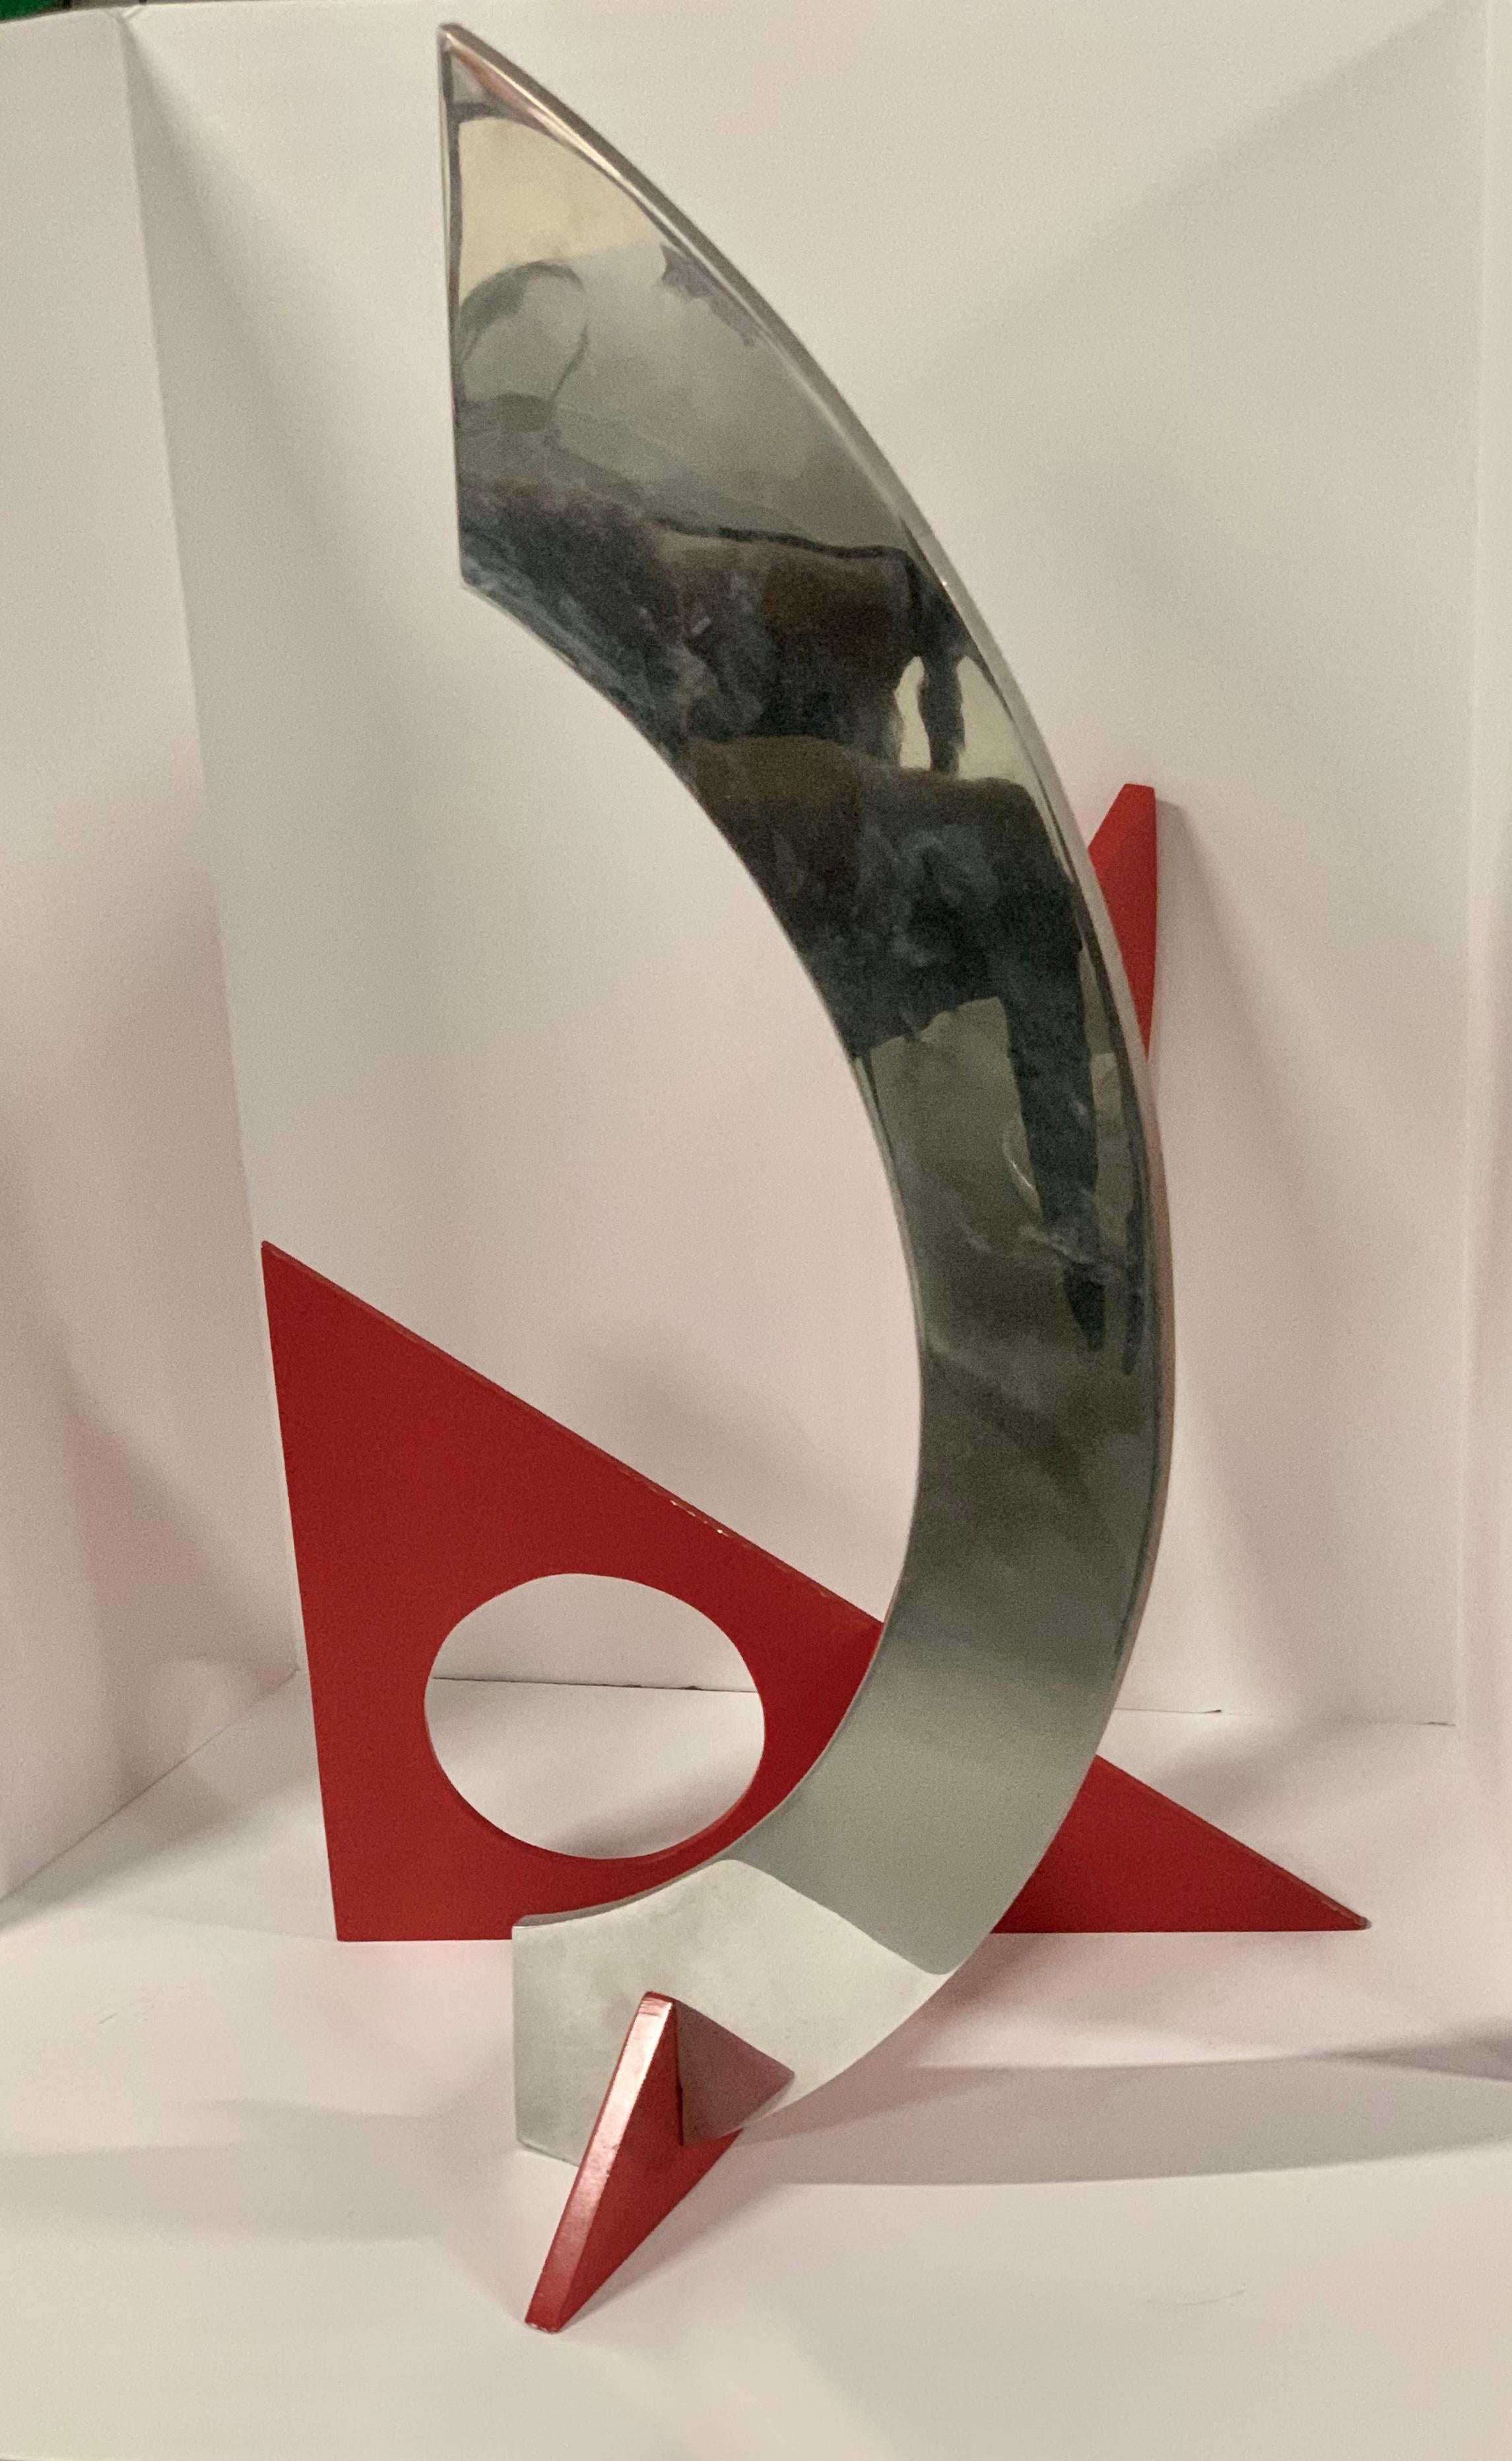 A painted aluminum sculpture by the noted American artist Frank Riggs (b. 1922). The piece is signed and dated 1990. In good condition with some minor paint loss along the edges and in some other spots. This sculpture can be used outdoors as it is